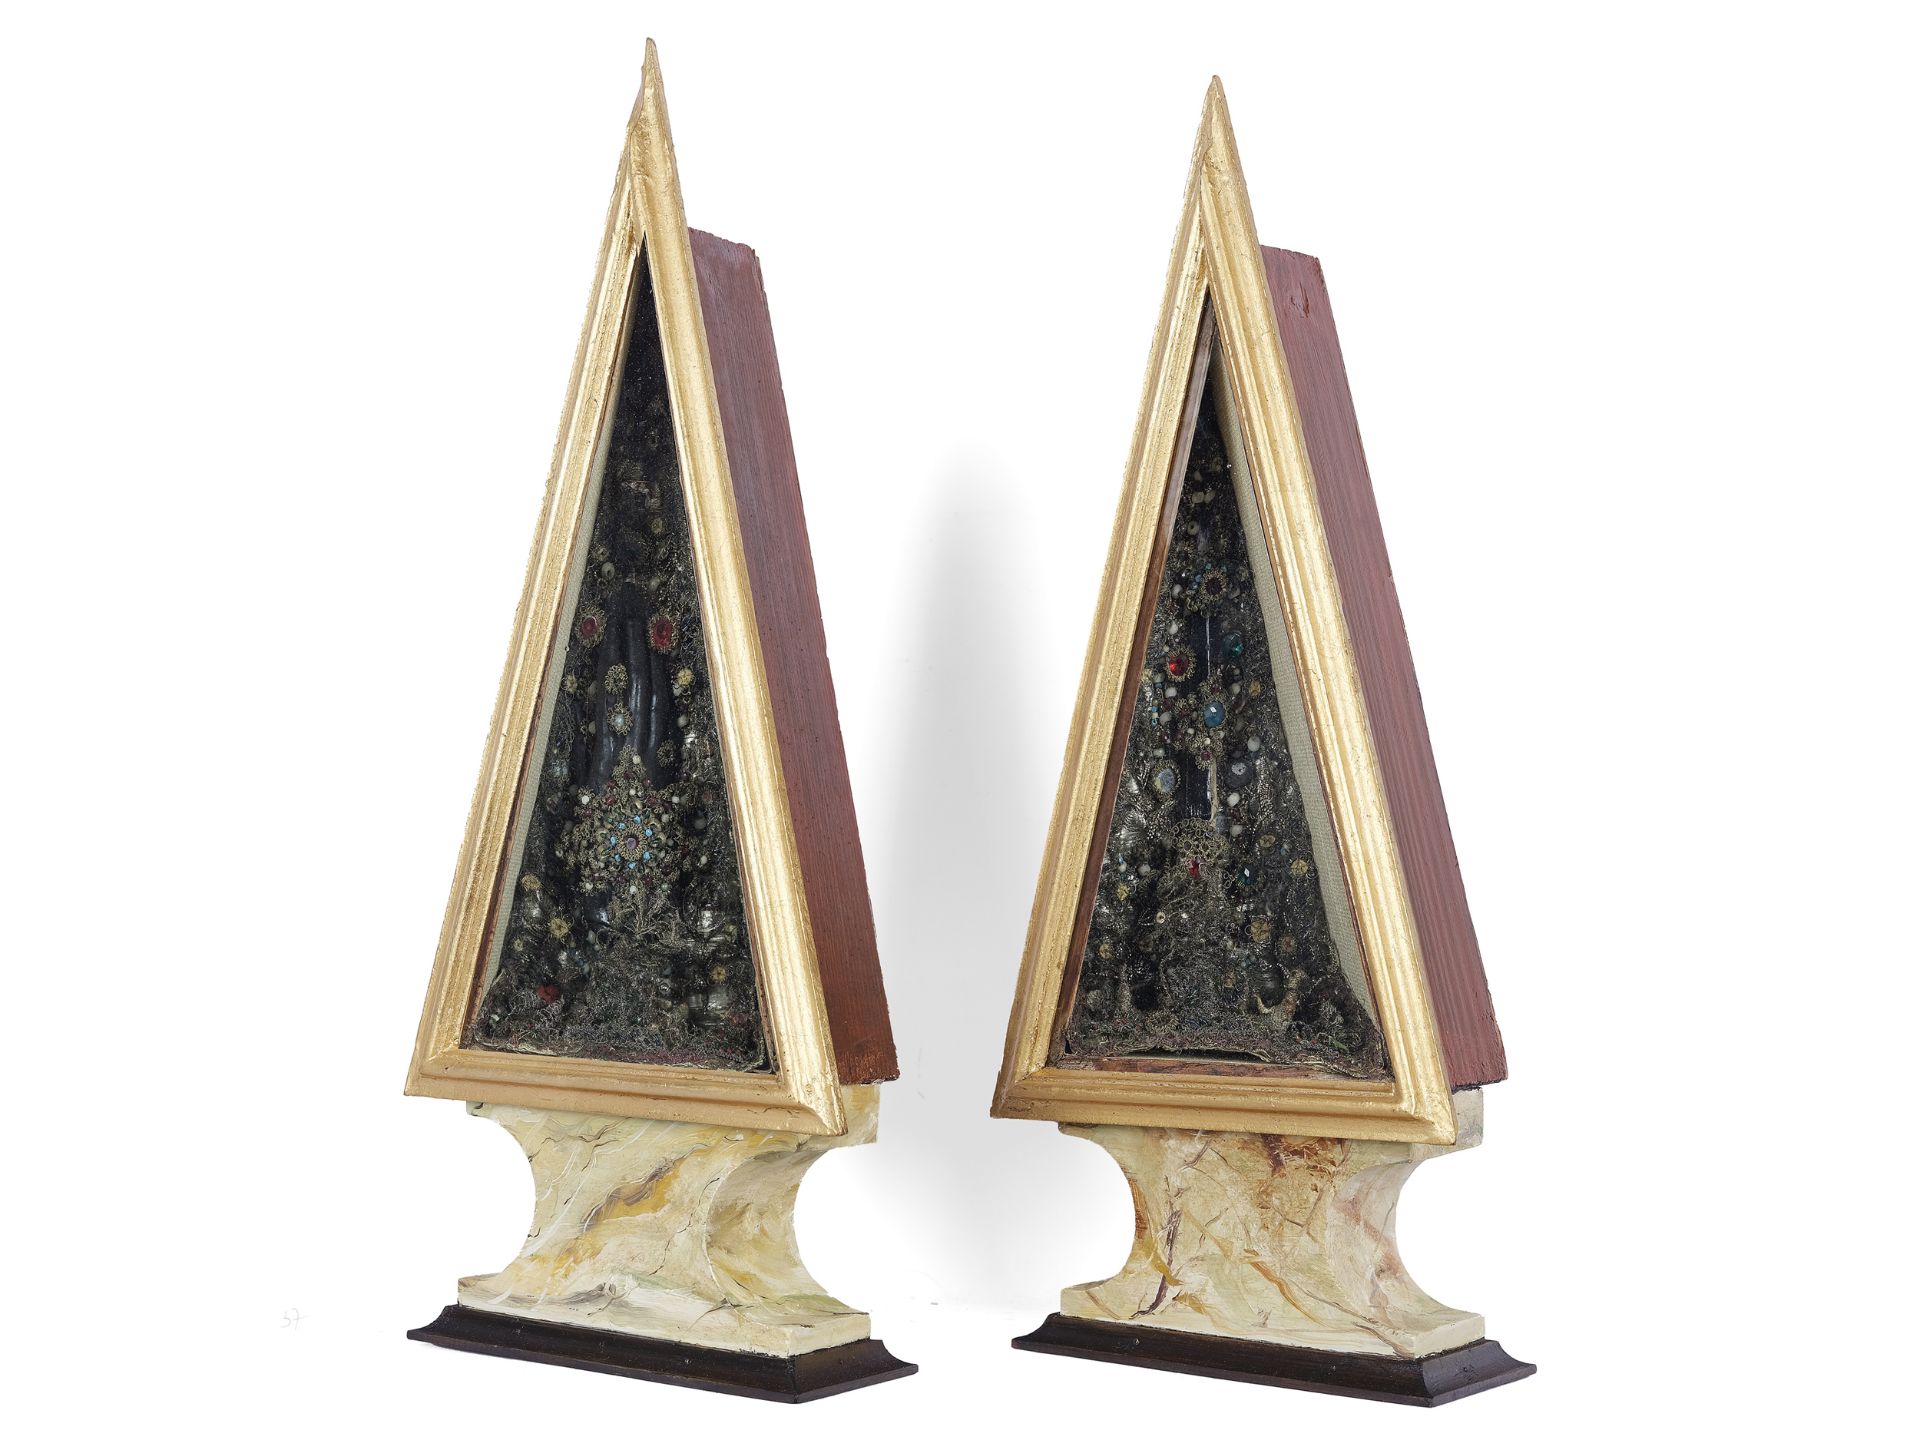 Pair of relics in display cases - Image 2 of 3